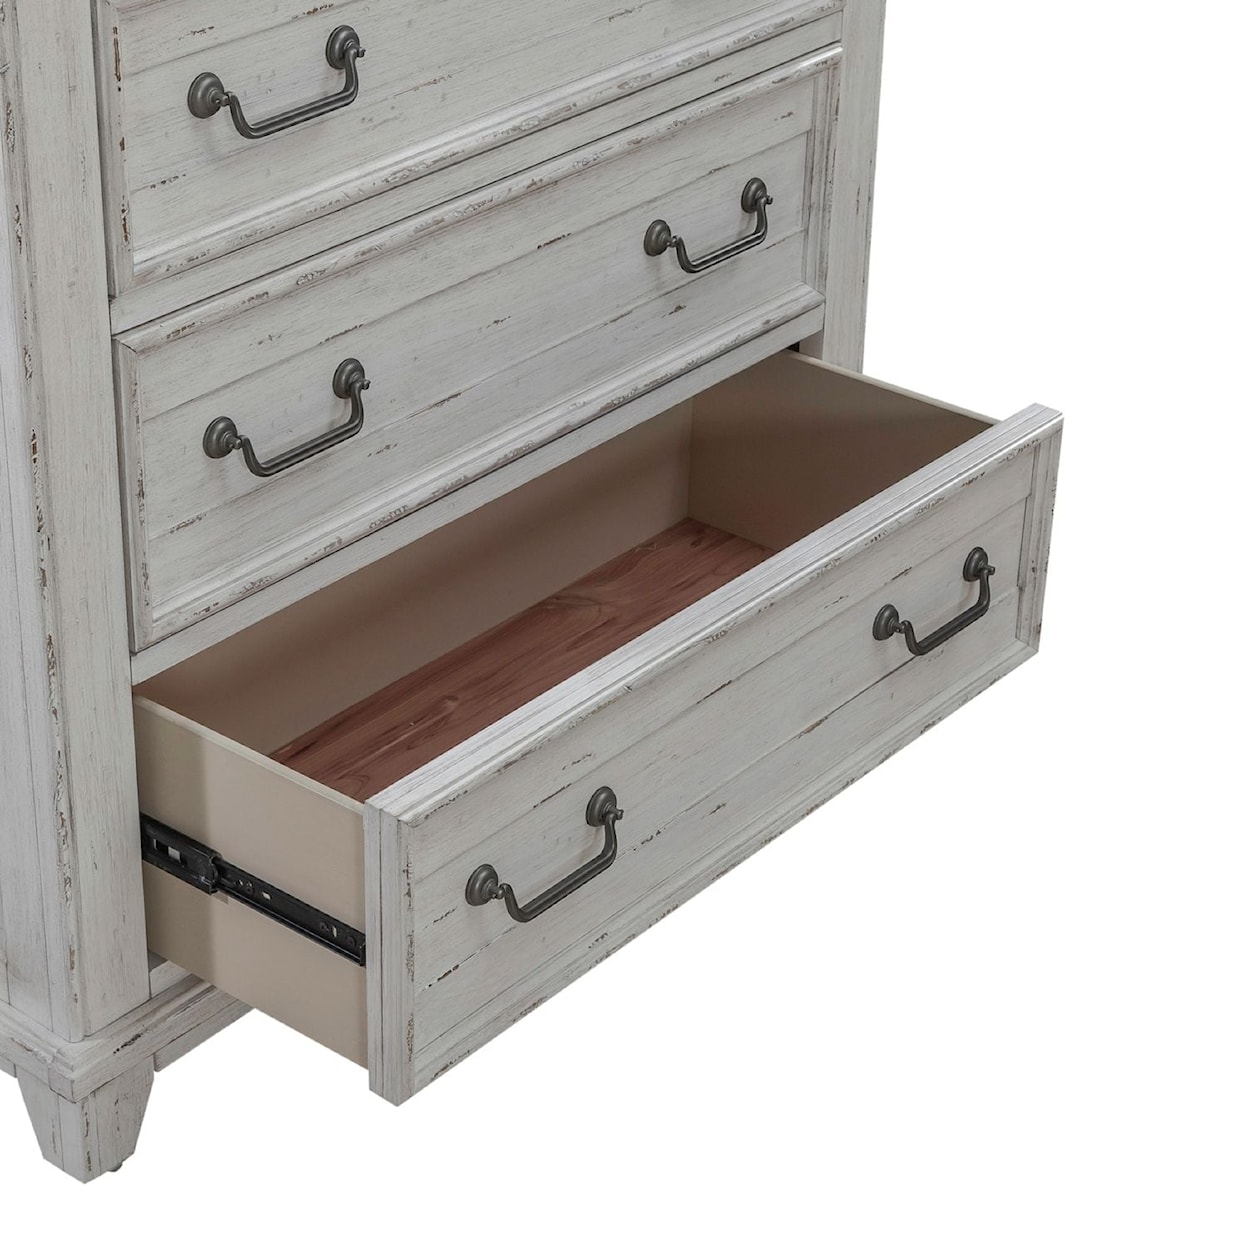 Libby River Place 6-Drawer Bedroom Chest